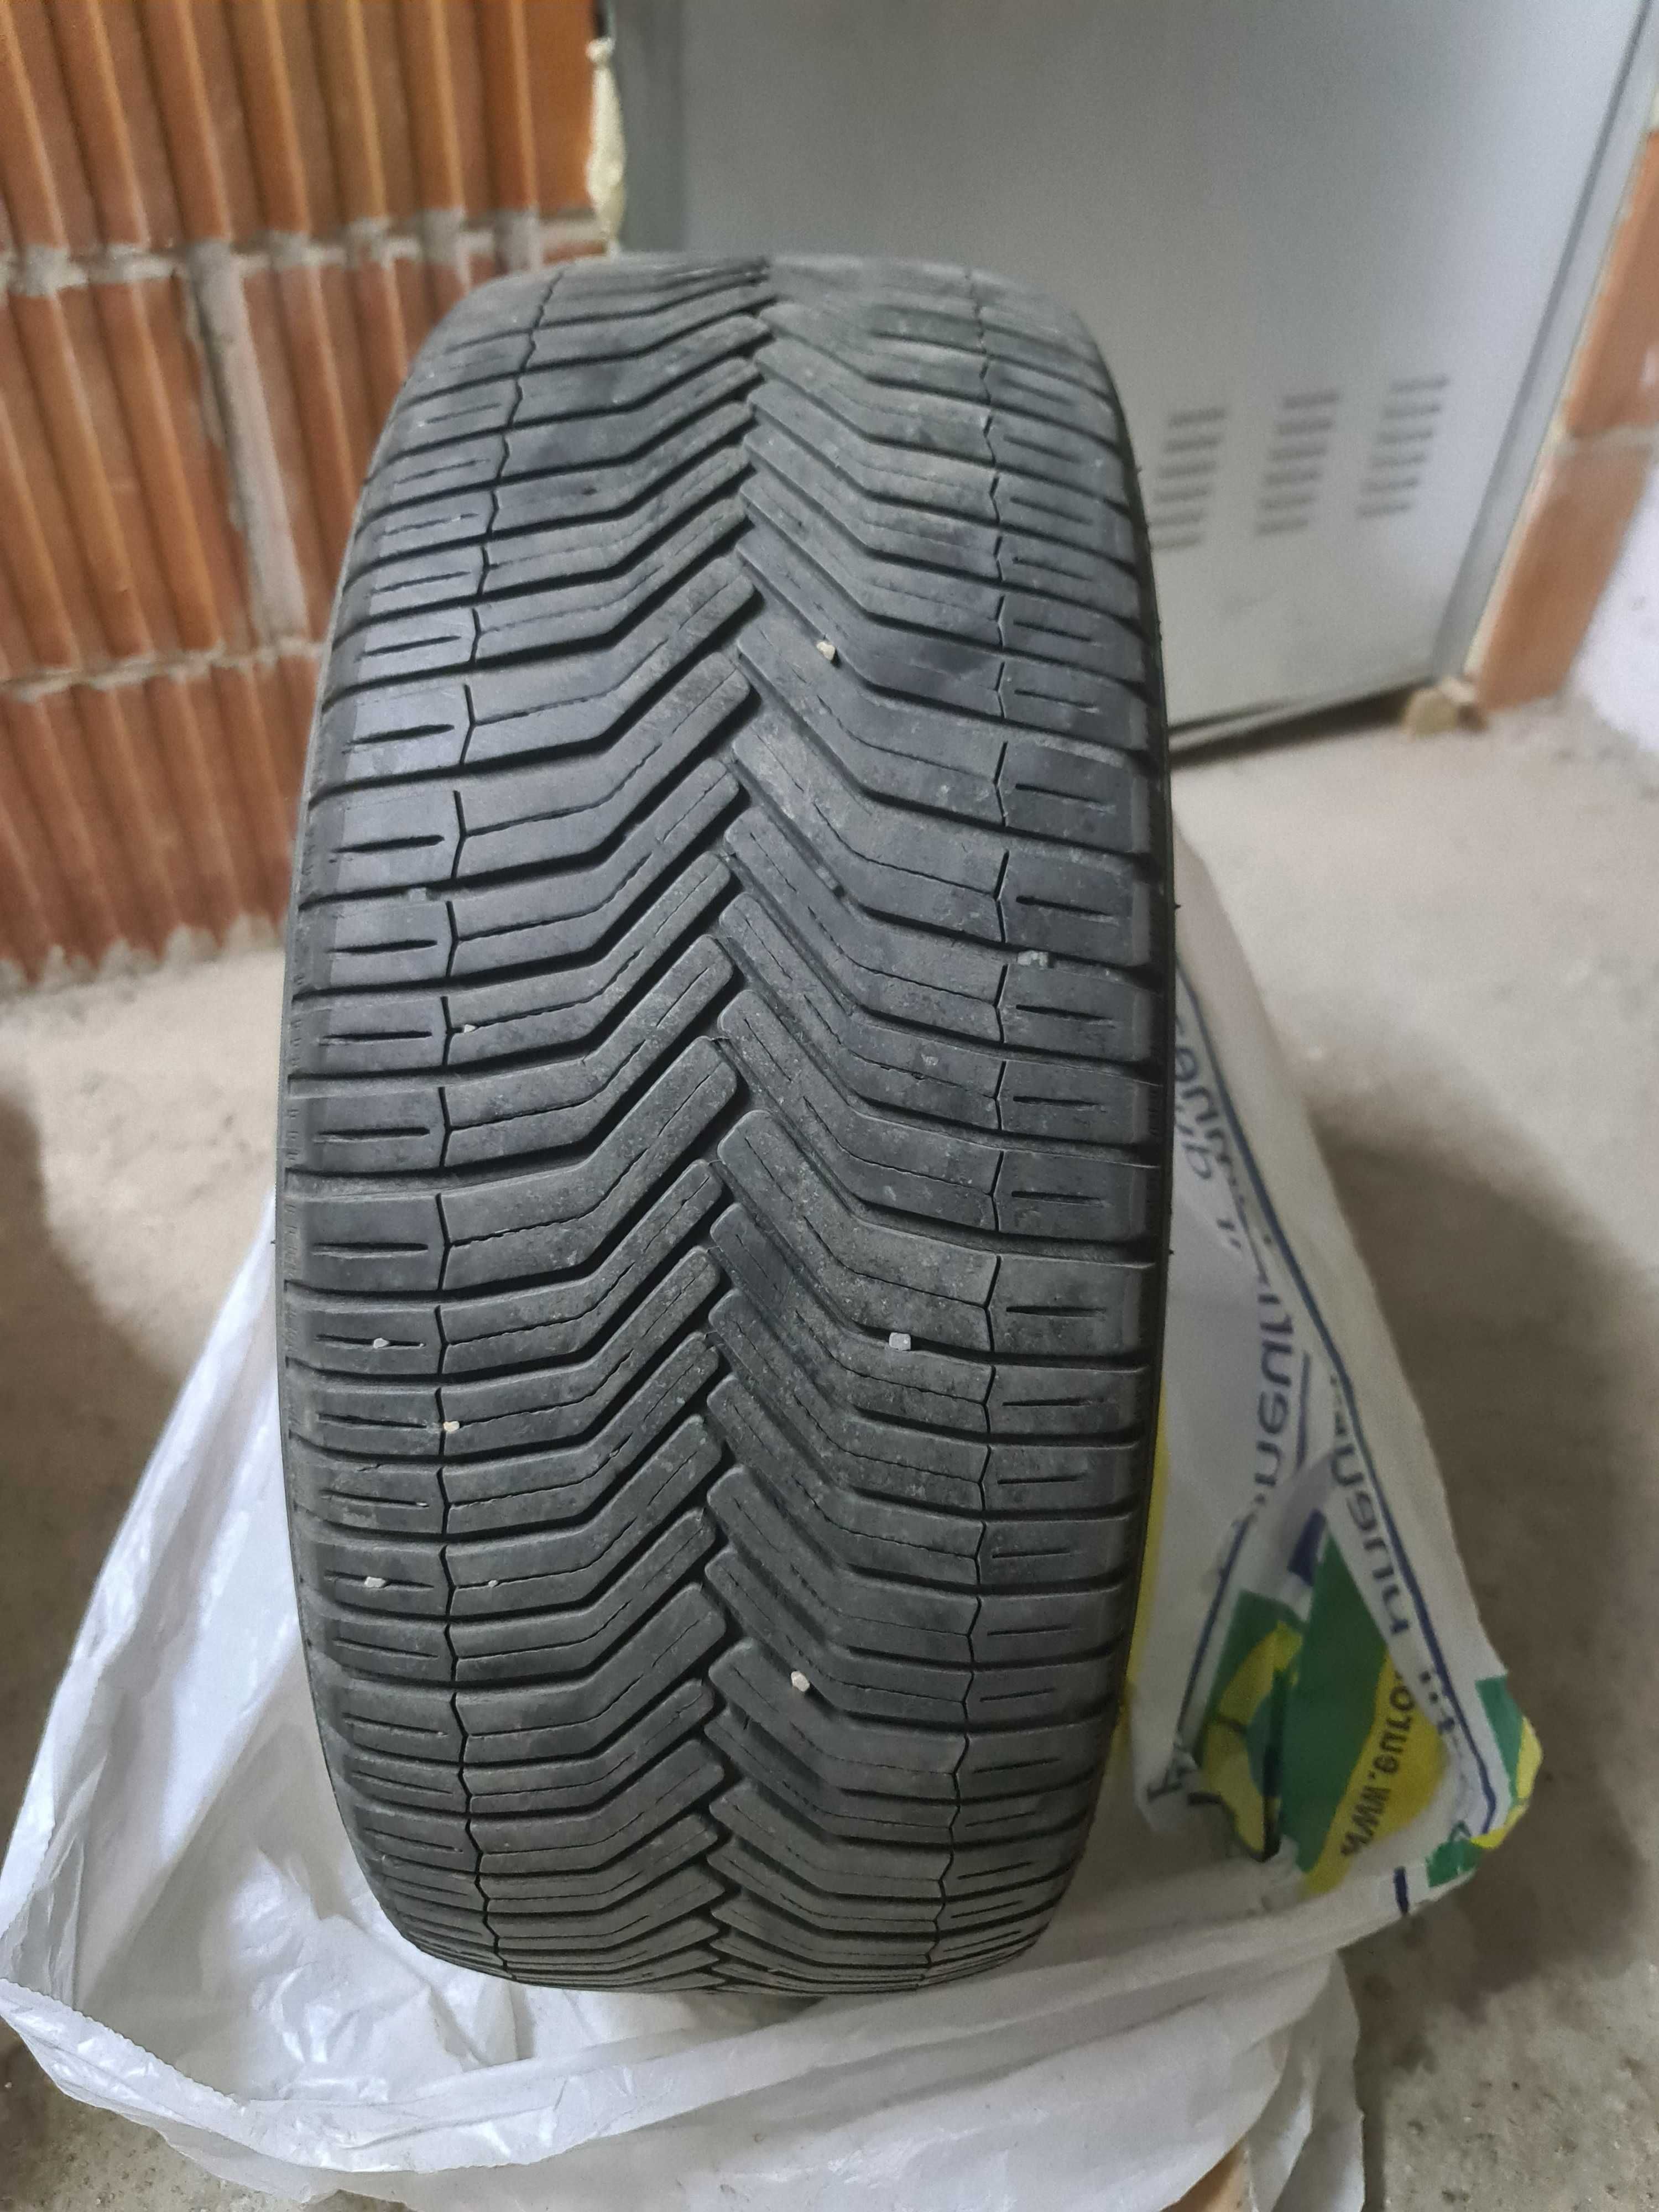 2 Anvelope Michelin CrossClimate 235 45 R18 ambele 700 lei